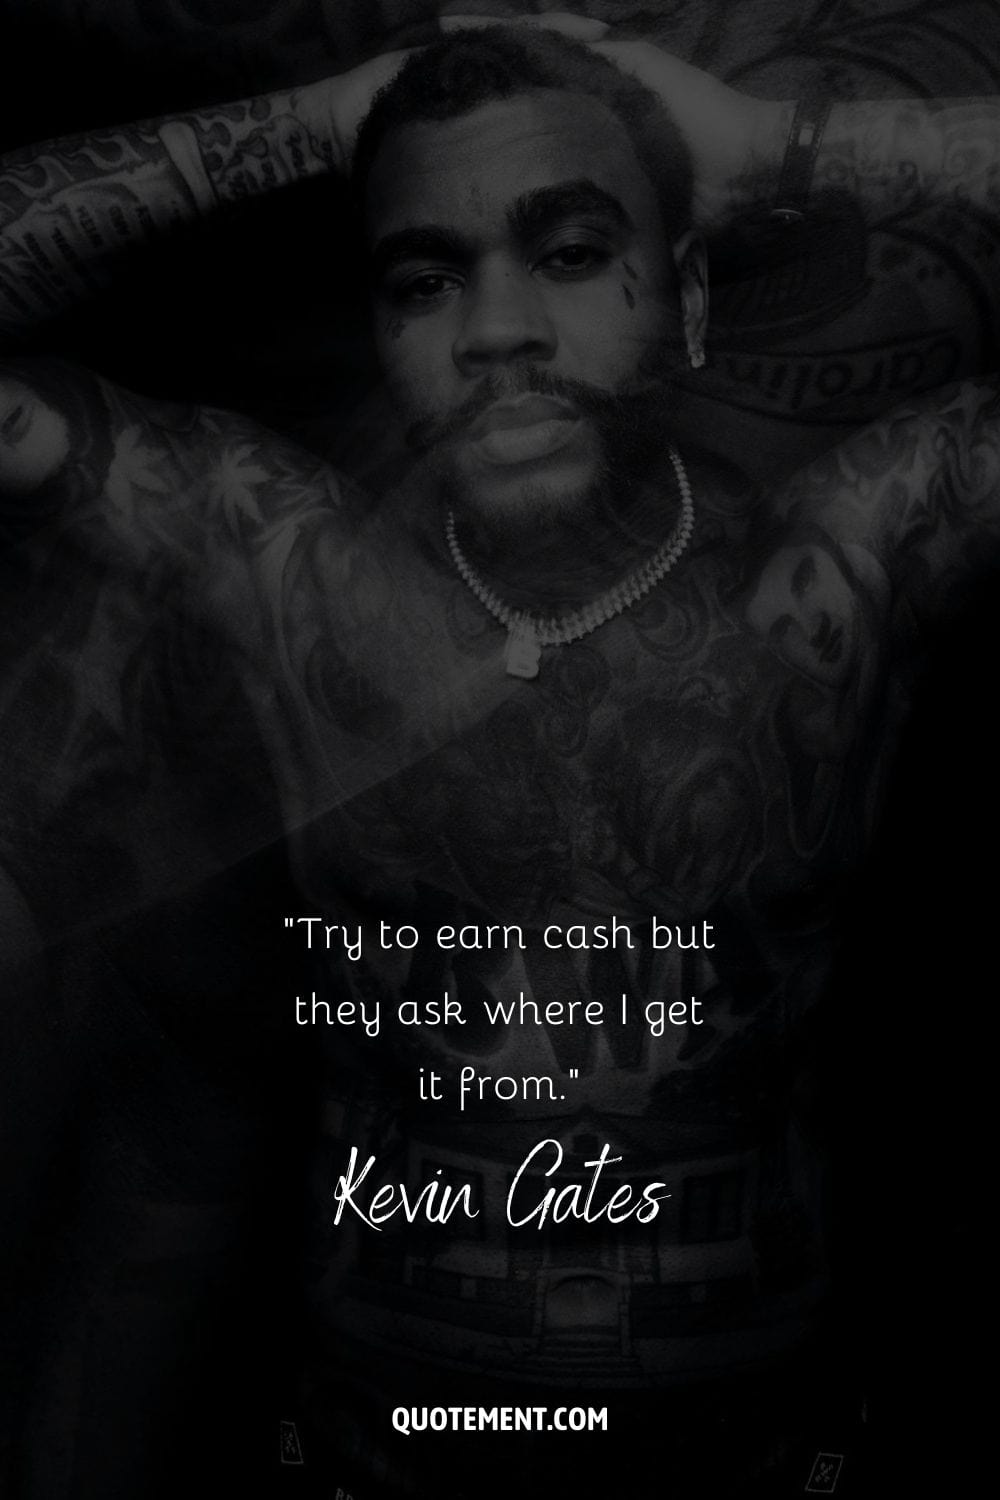 “Try to earn cash but they ask where I get it from.” – Kevin Gates